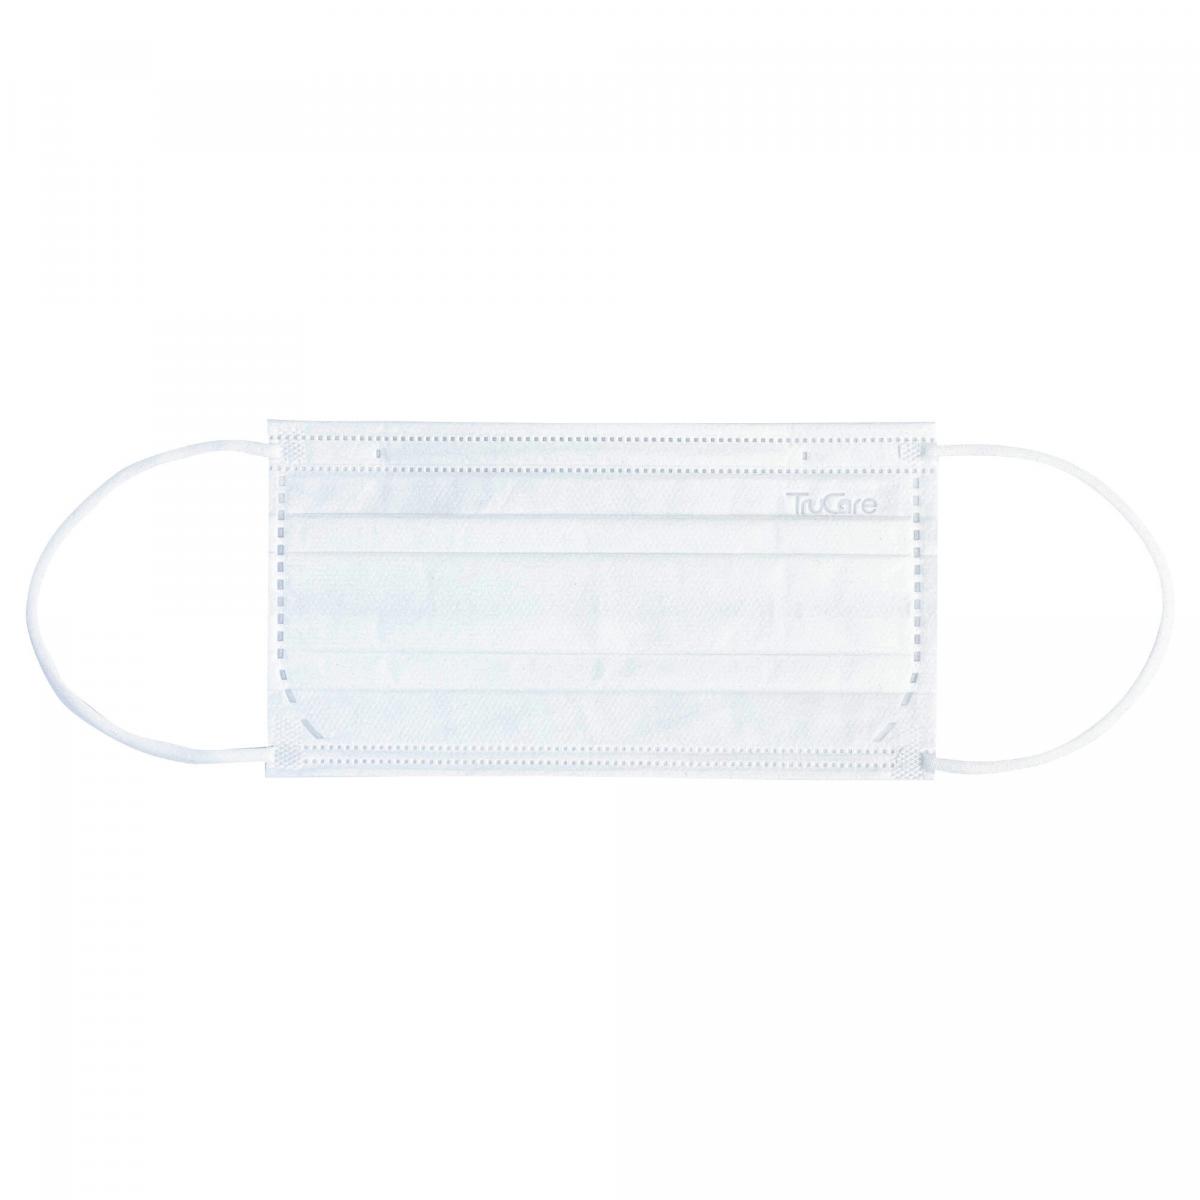 Prime 4 Folds super light Surgical Mask (175mm Non-Individual packaging 50 pcs) [ASTM Level 3]